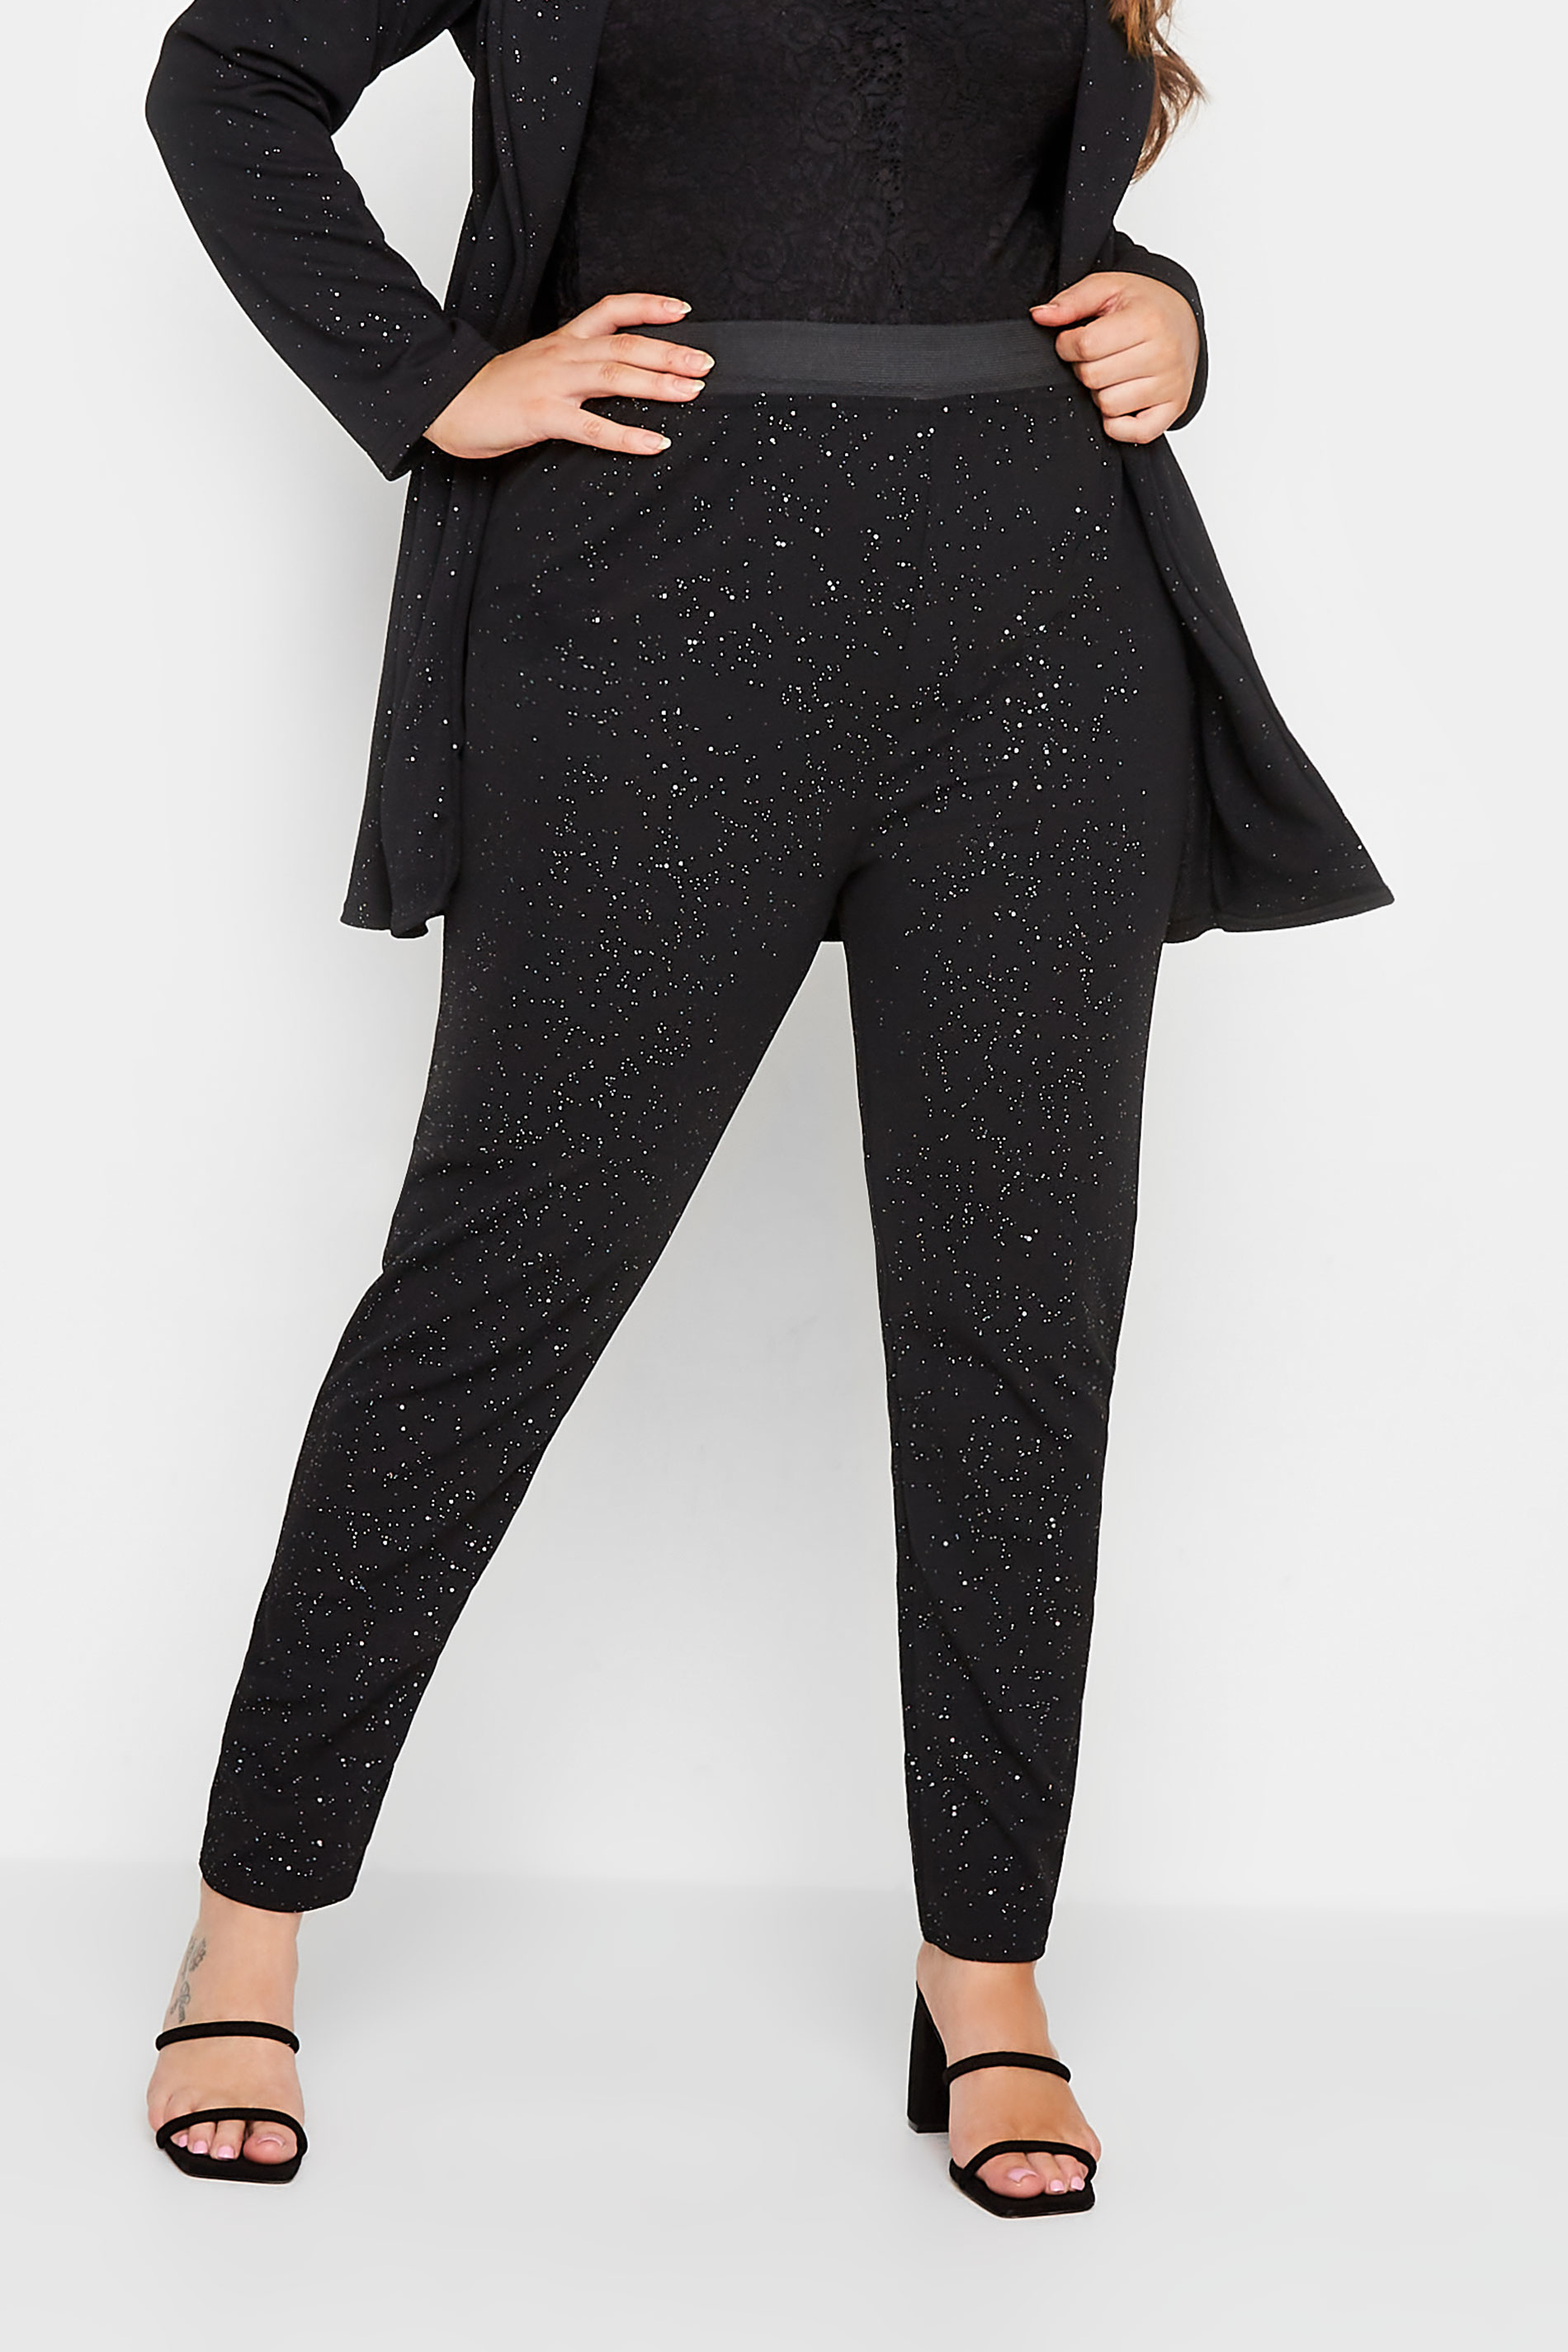 YOURS LONDON Plus Size Black Glitter Tapered Stretch Trousers | Yours Clothing 1